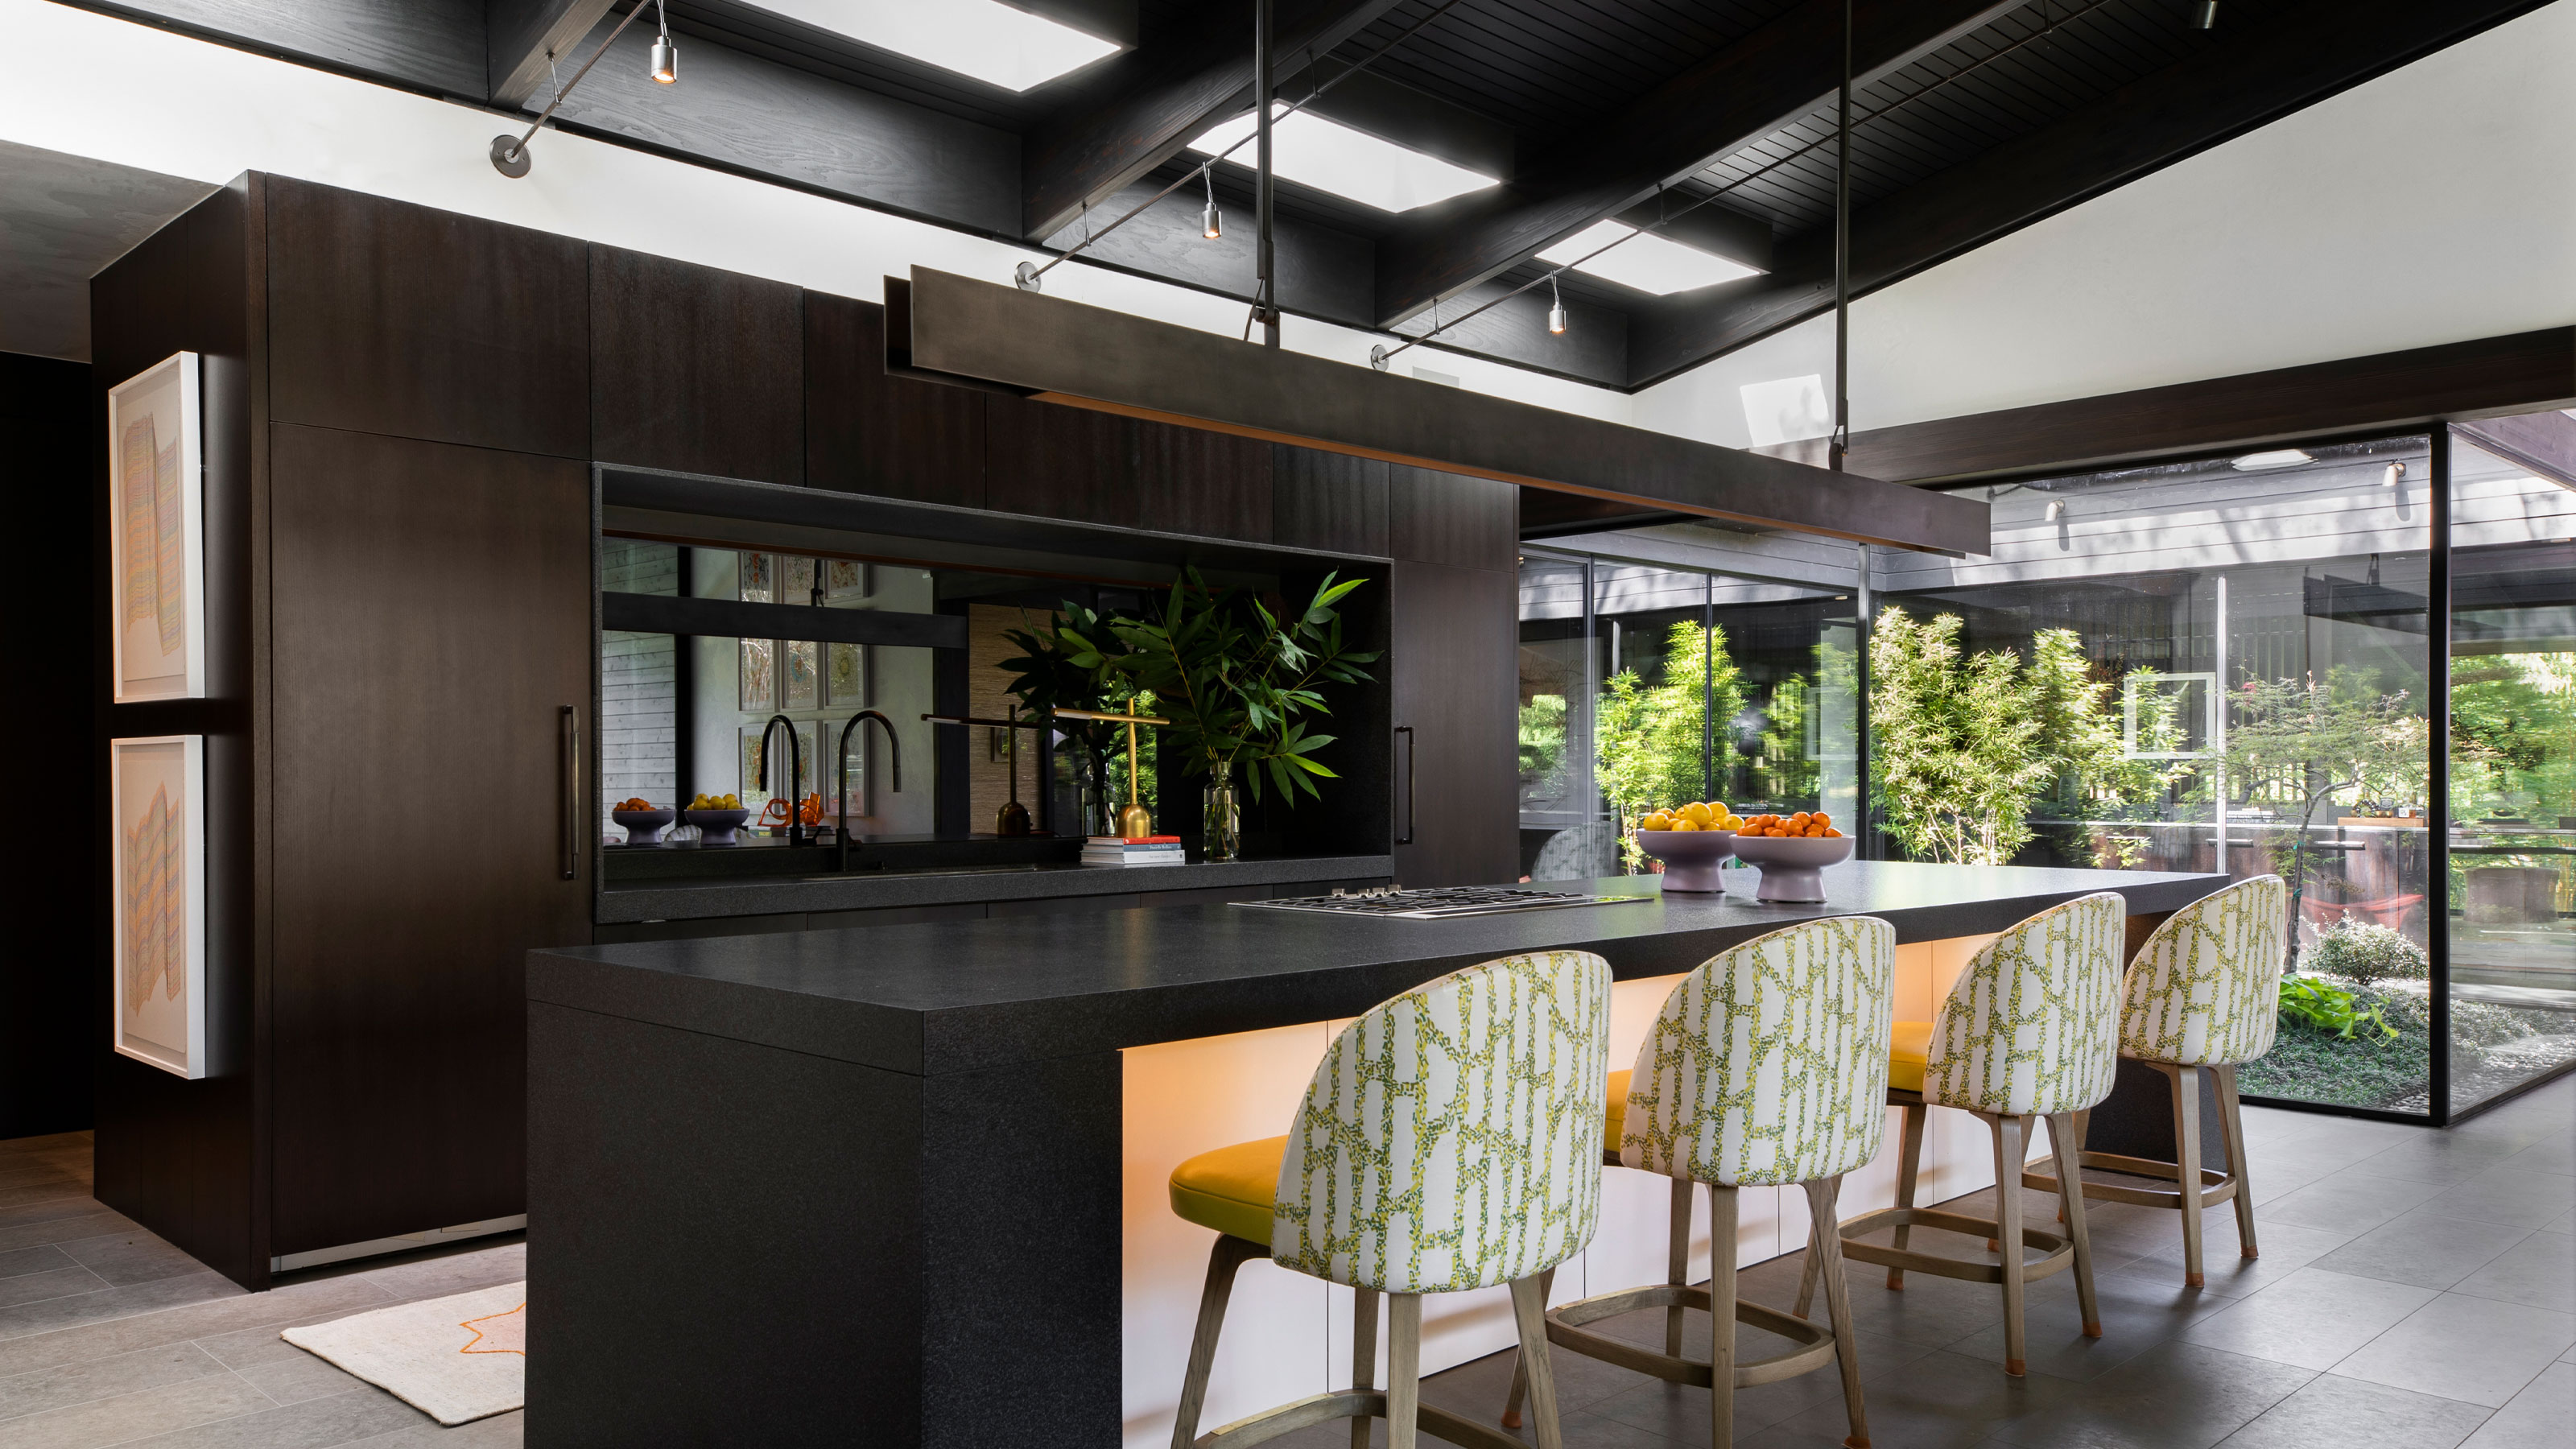 kitchen ceiling ideas: 12 designs for the heart of the home |